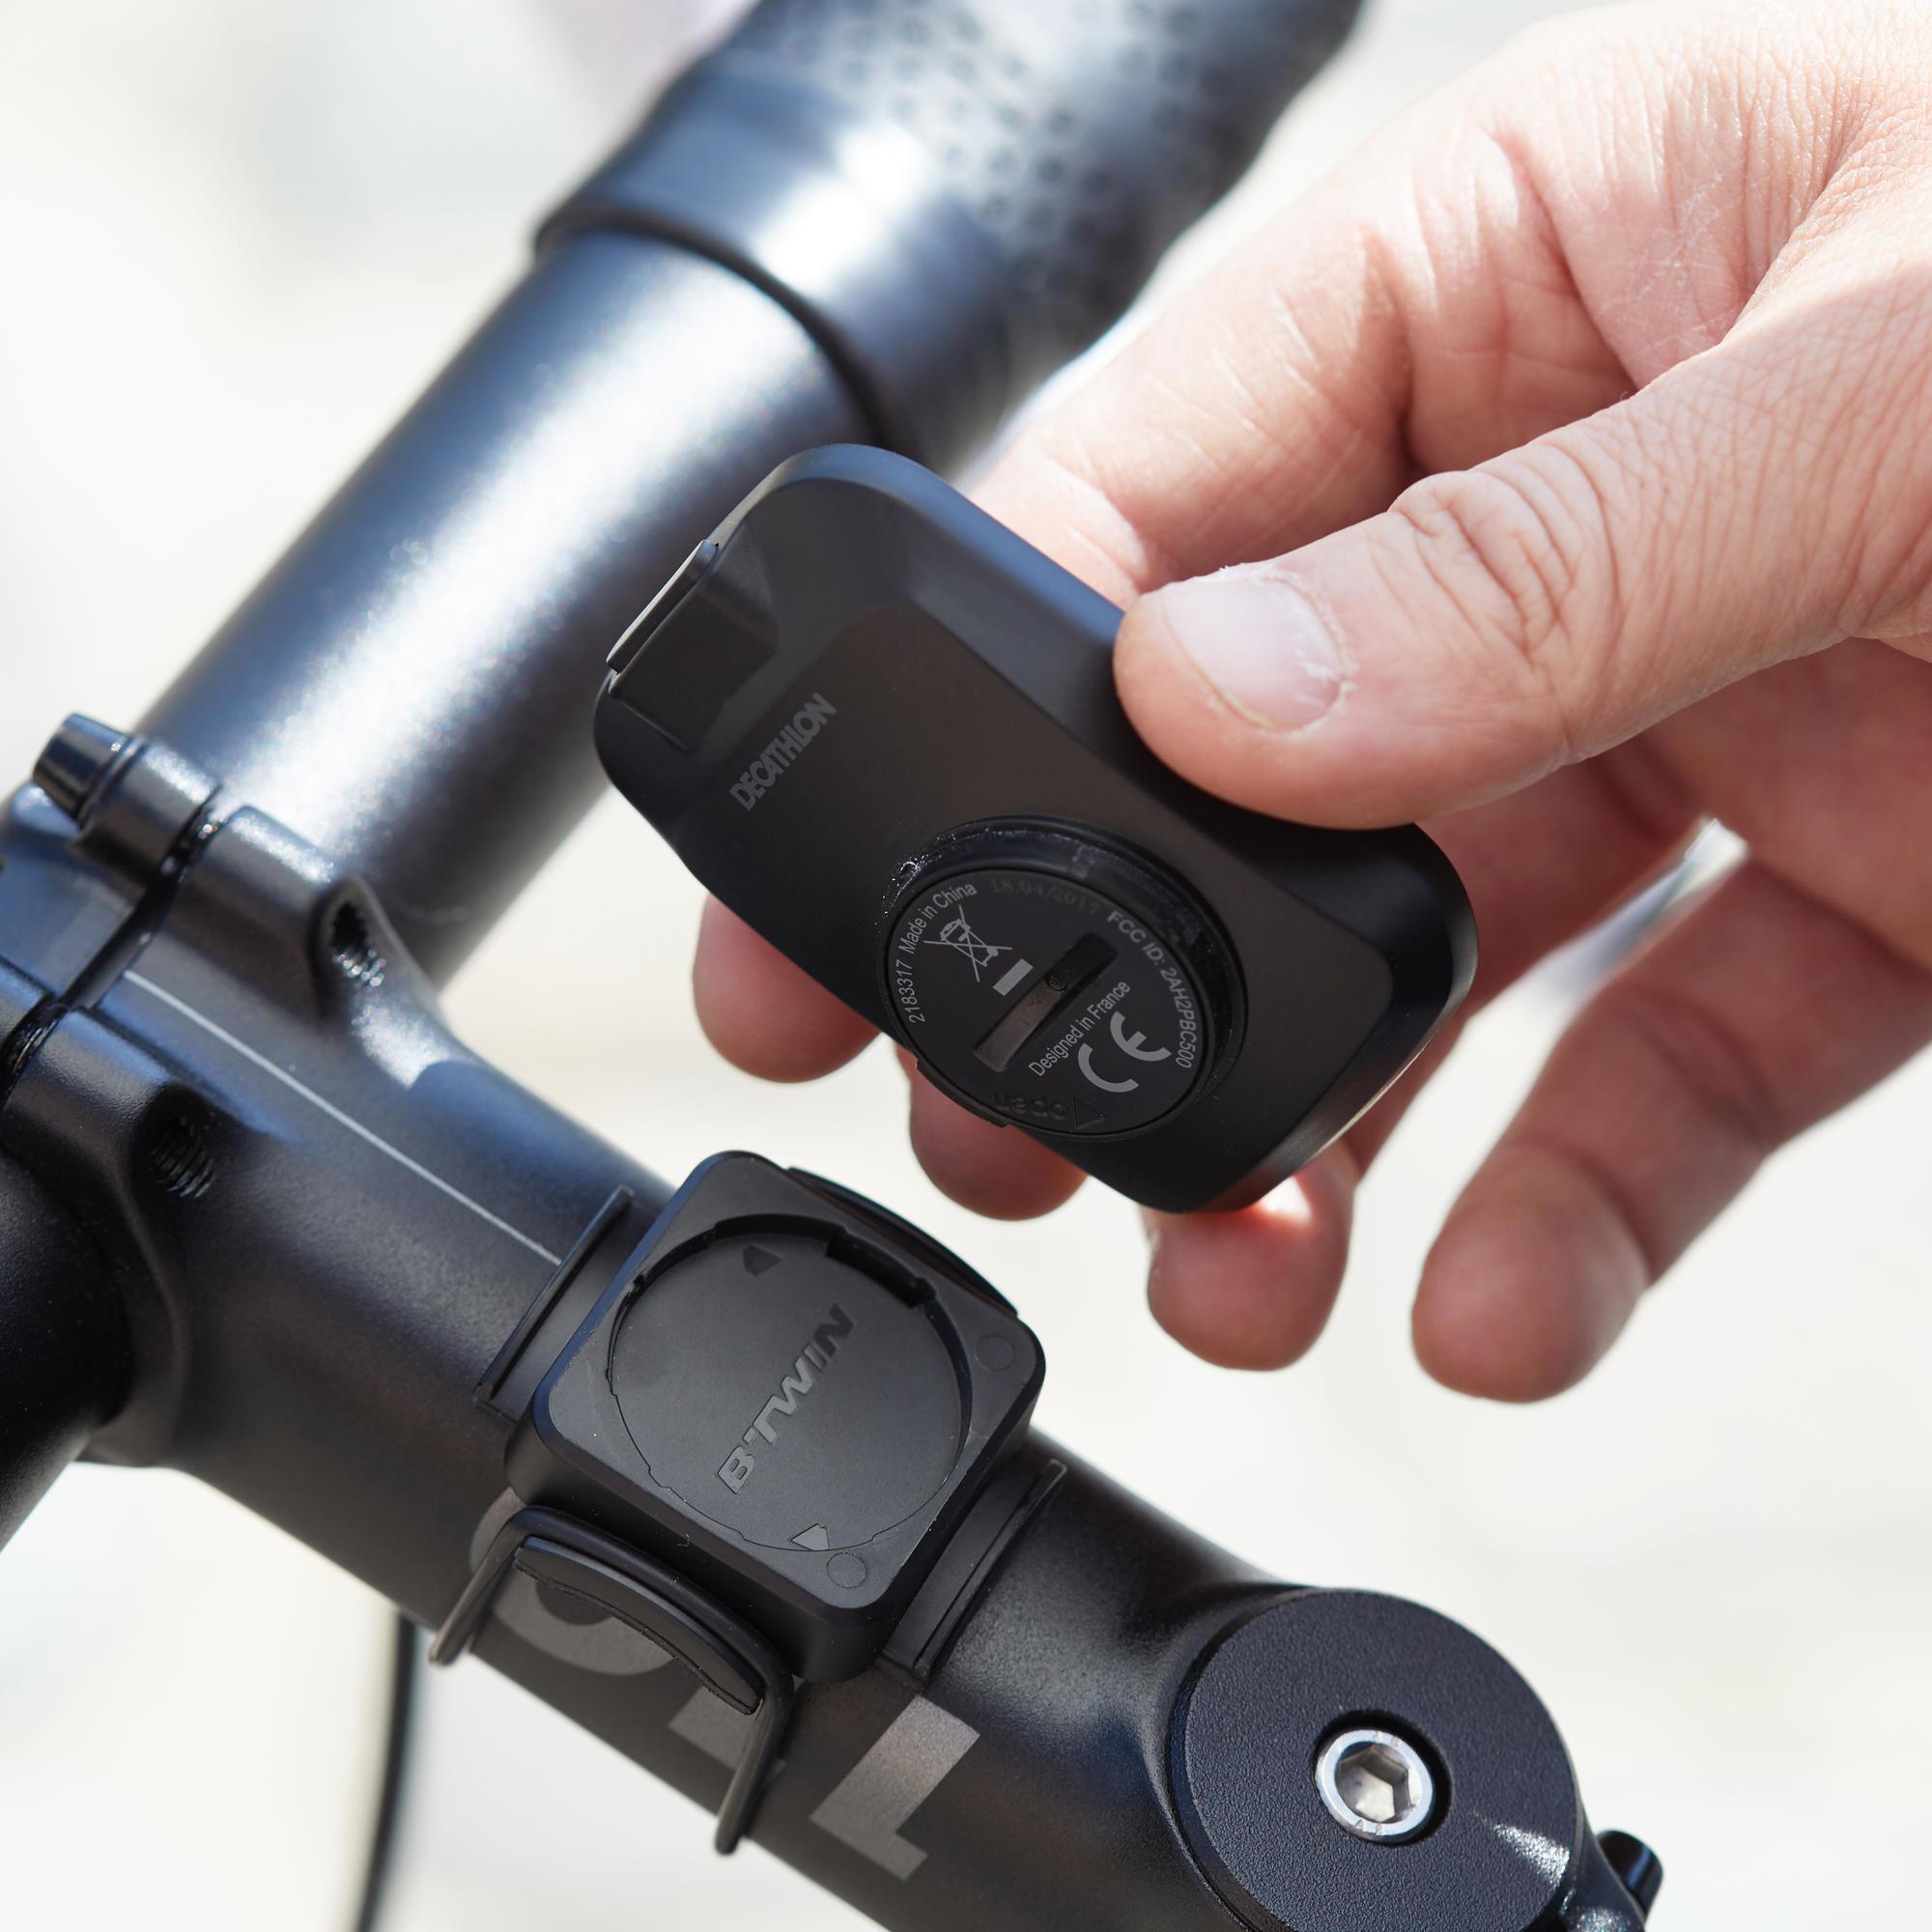 btwin 500 cyclometer review